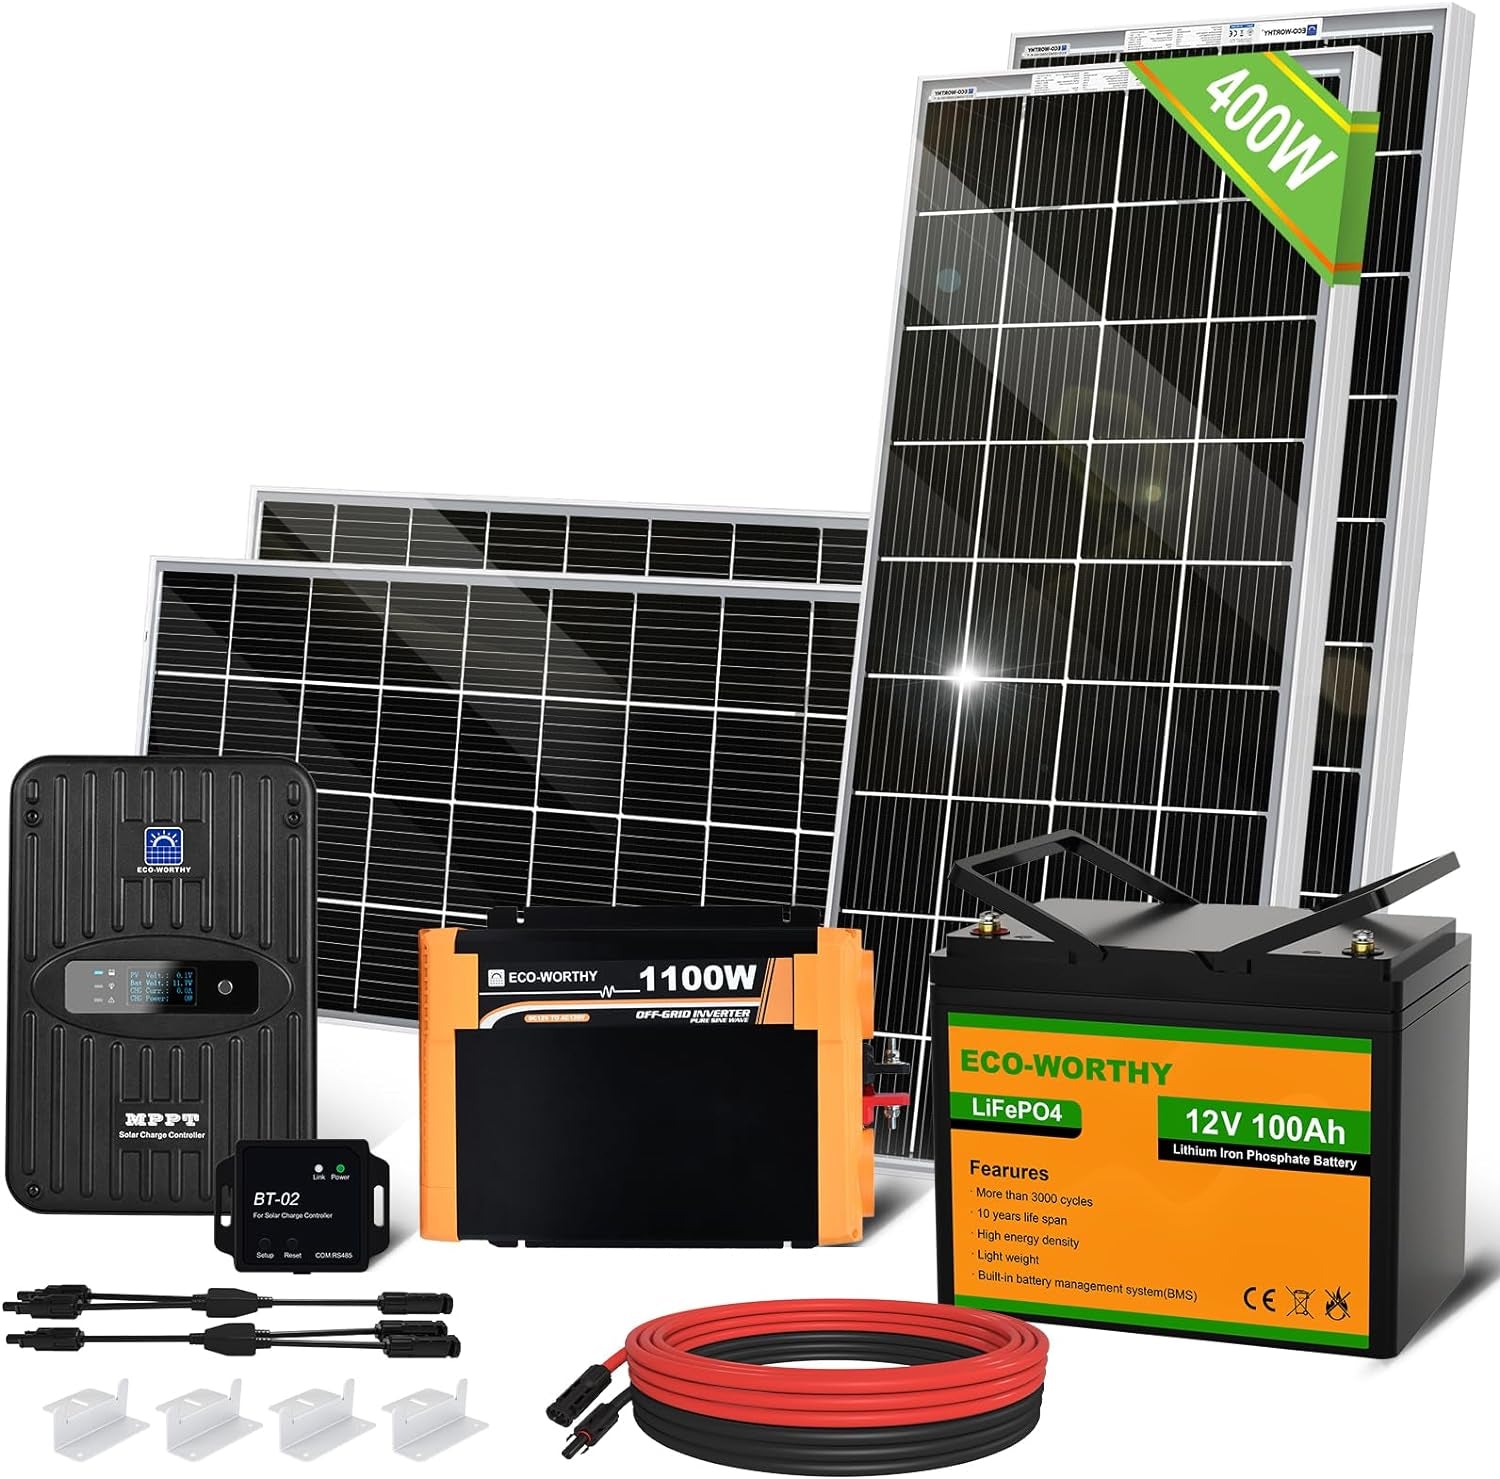 1.6KWH Complete Solar Panel Kit 400W 12V for RV off Grid: 4Pcs 100W Bifacial Solar Panels + 40A MPPT Controller +12V 100Ah Lithium Battery + 1100W Solar Power Inverter + Bluetooth Module